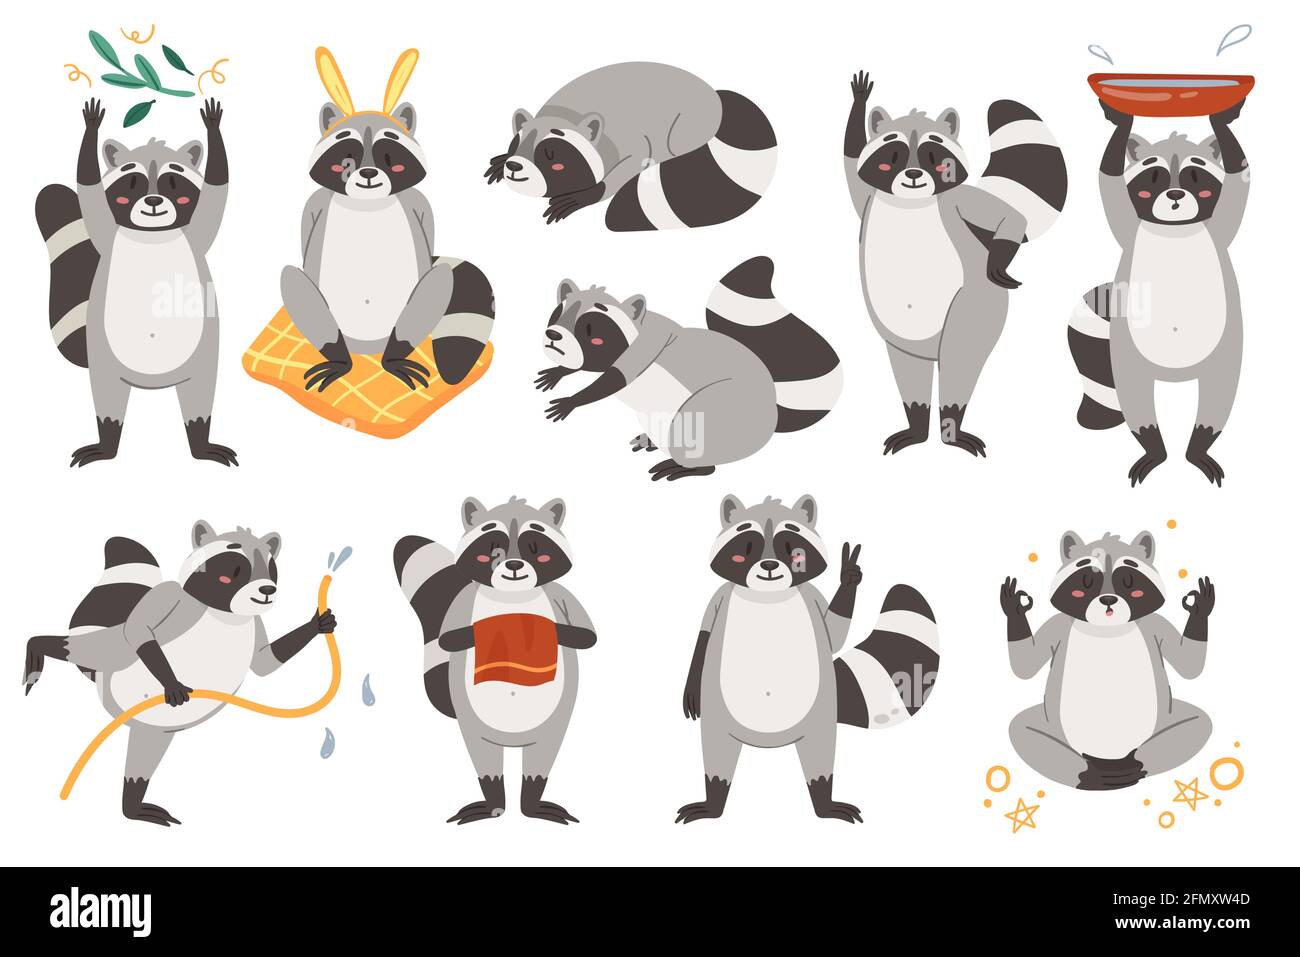 Raccoons cute animal vector illustration set. Cartoon funny comic racoon characters in different adorable poses childish collection, waving cheering sleeping doing yoga meditation isolated on white Stock Vector